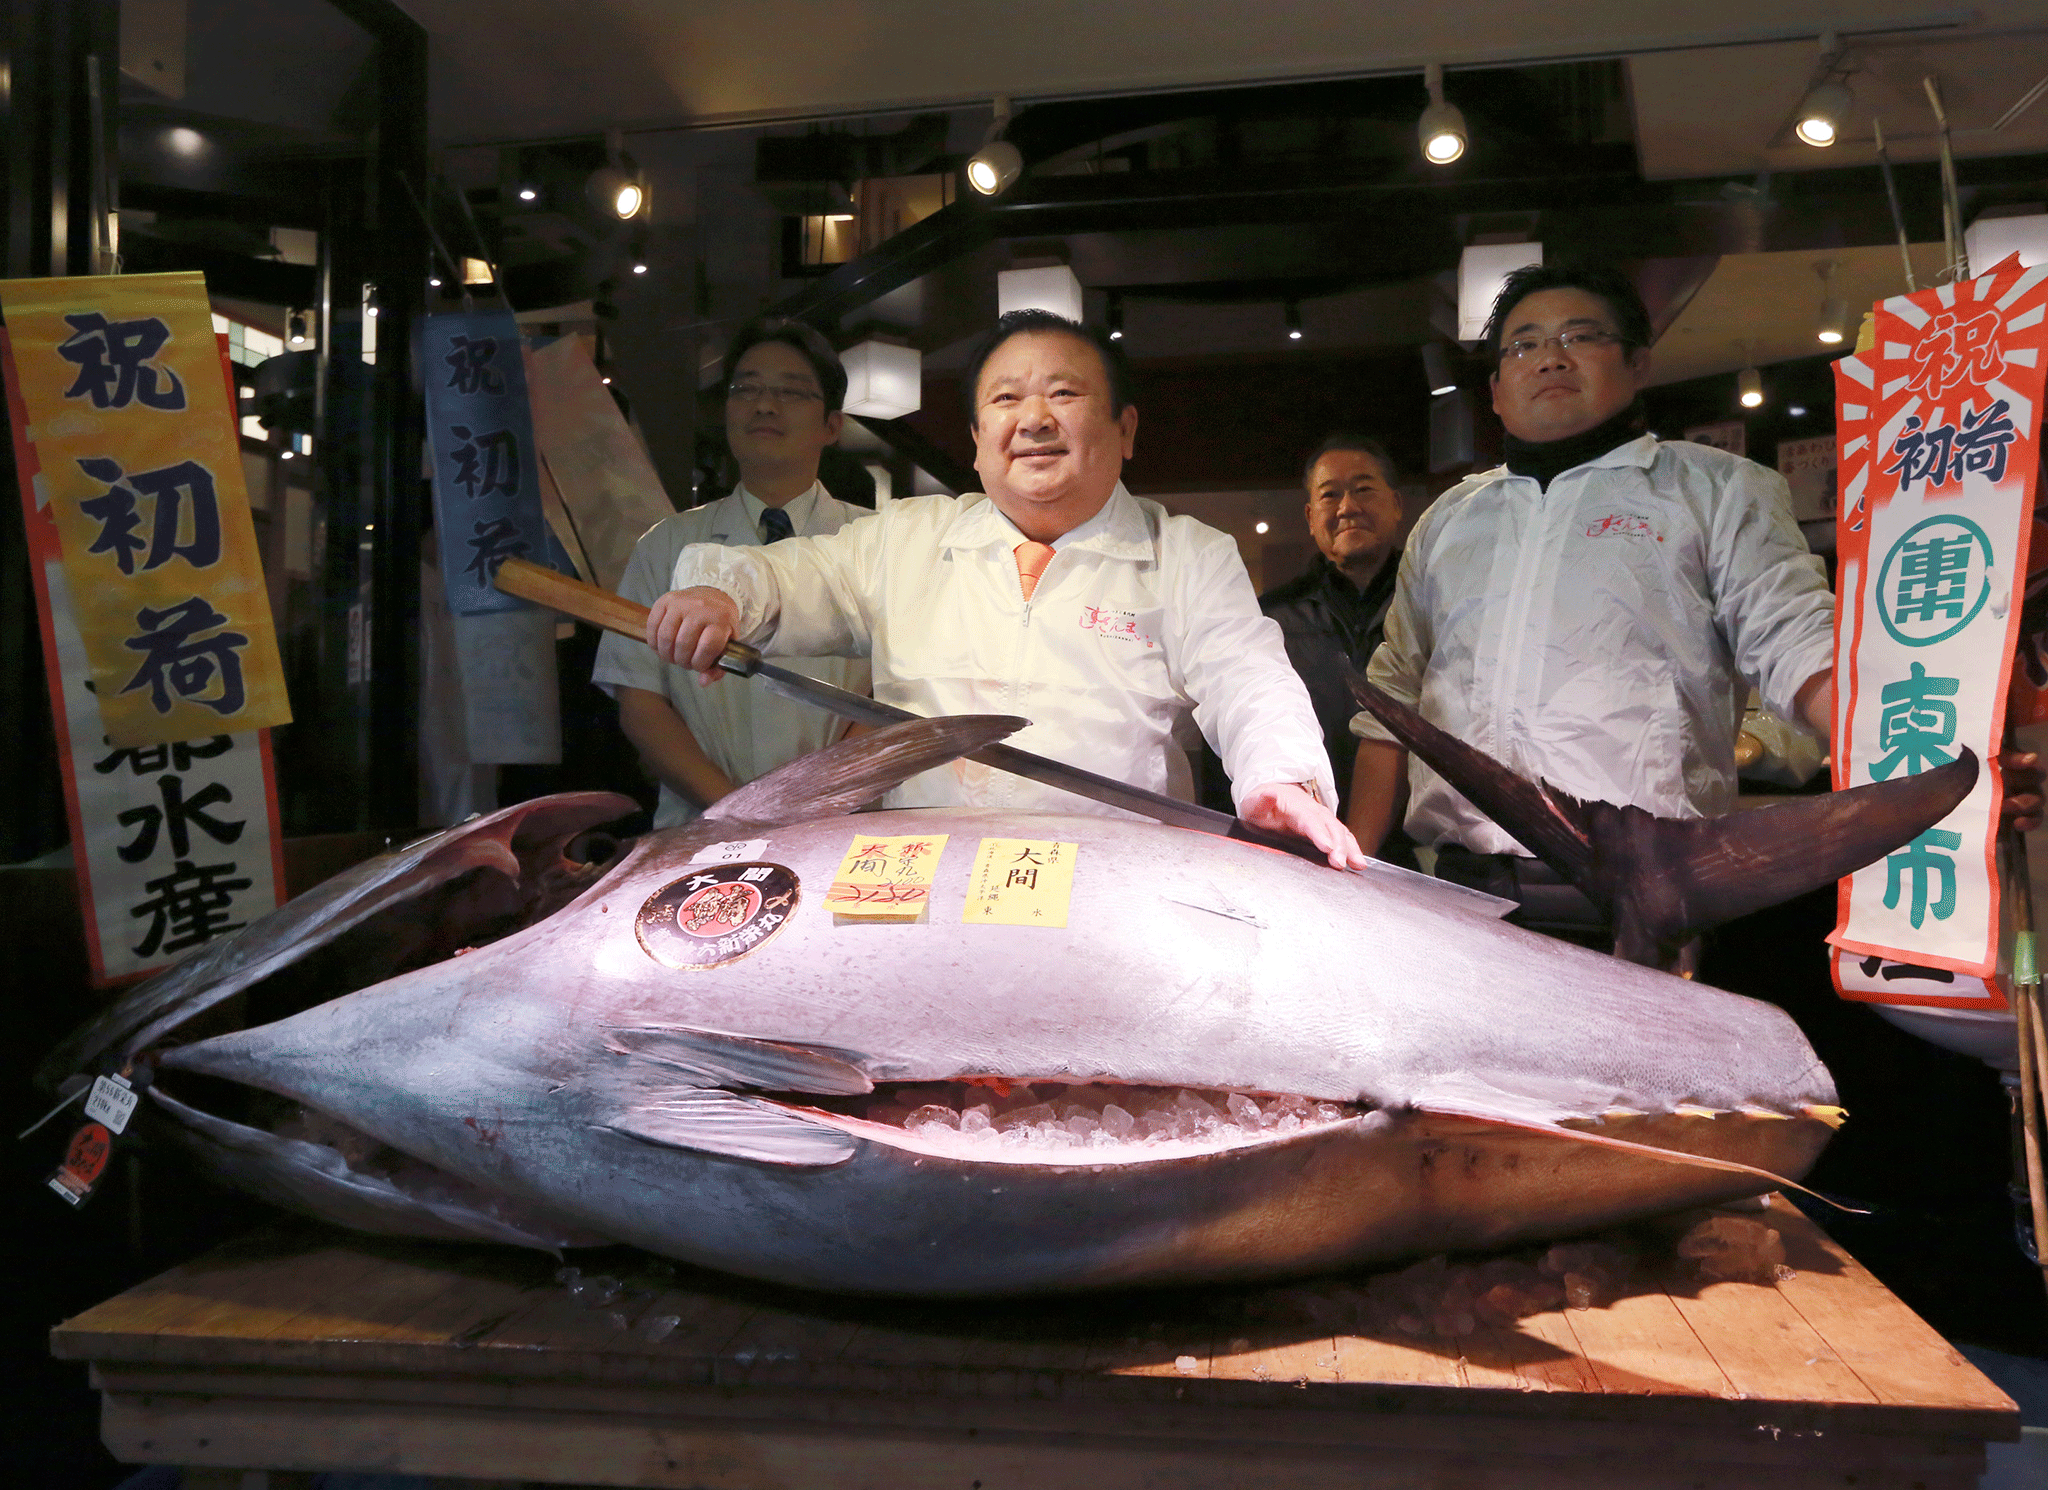 Kiyomura owner Kiyoshi Kimura posed, beaming, after the predawn New Year auction with the gleaming, man-sized fish